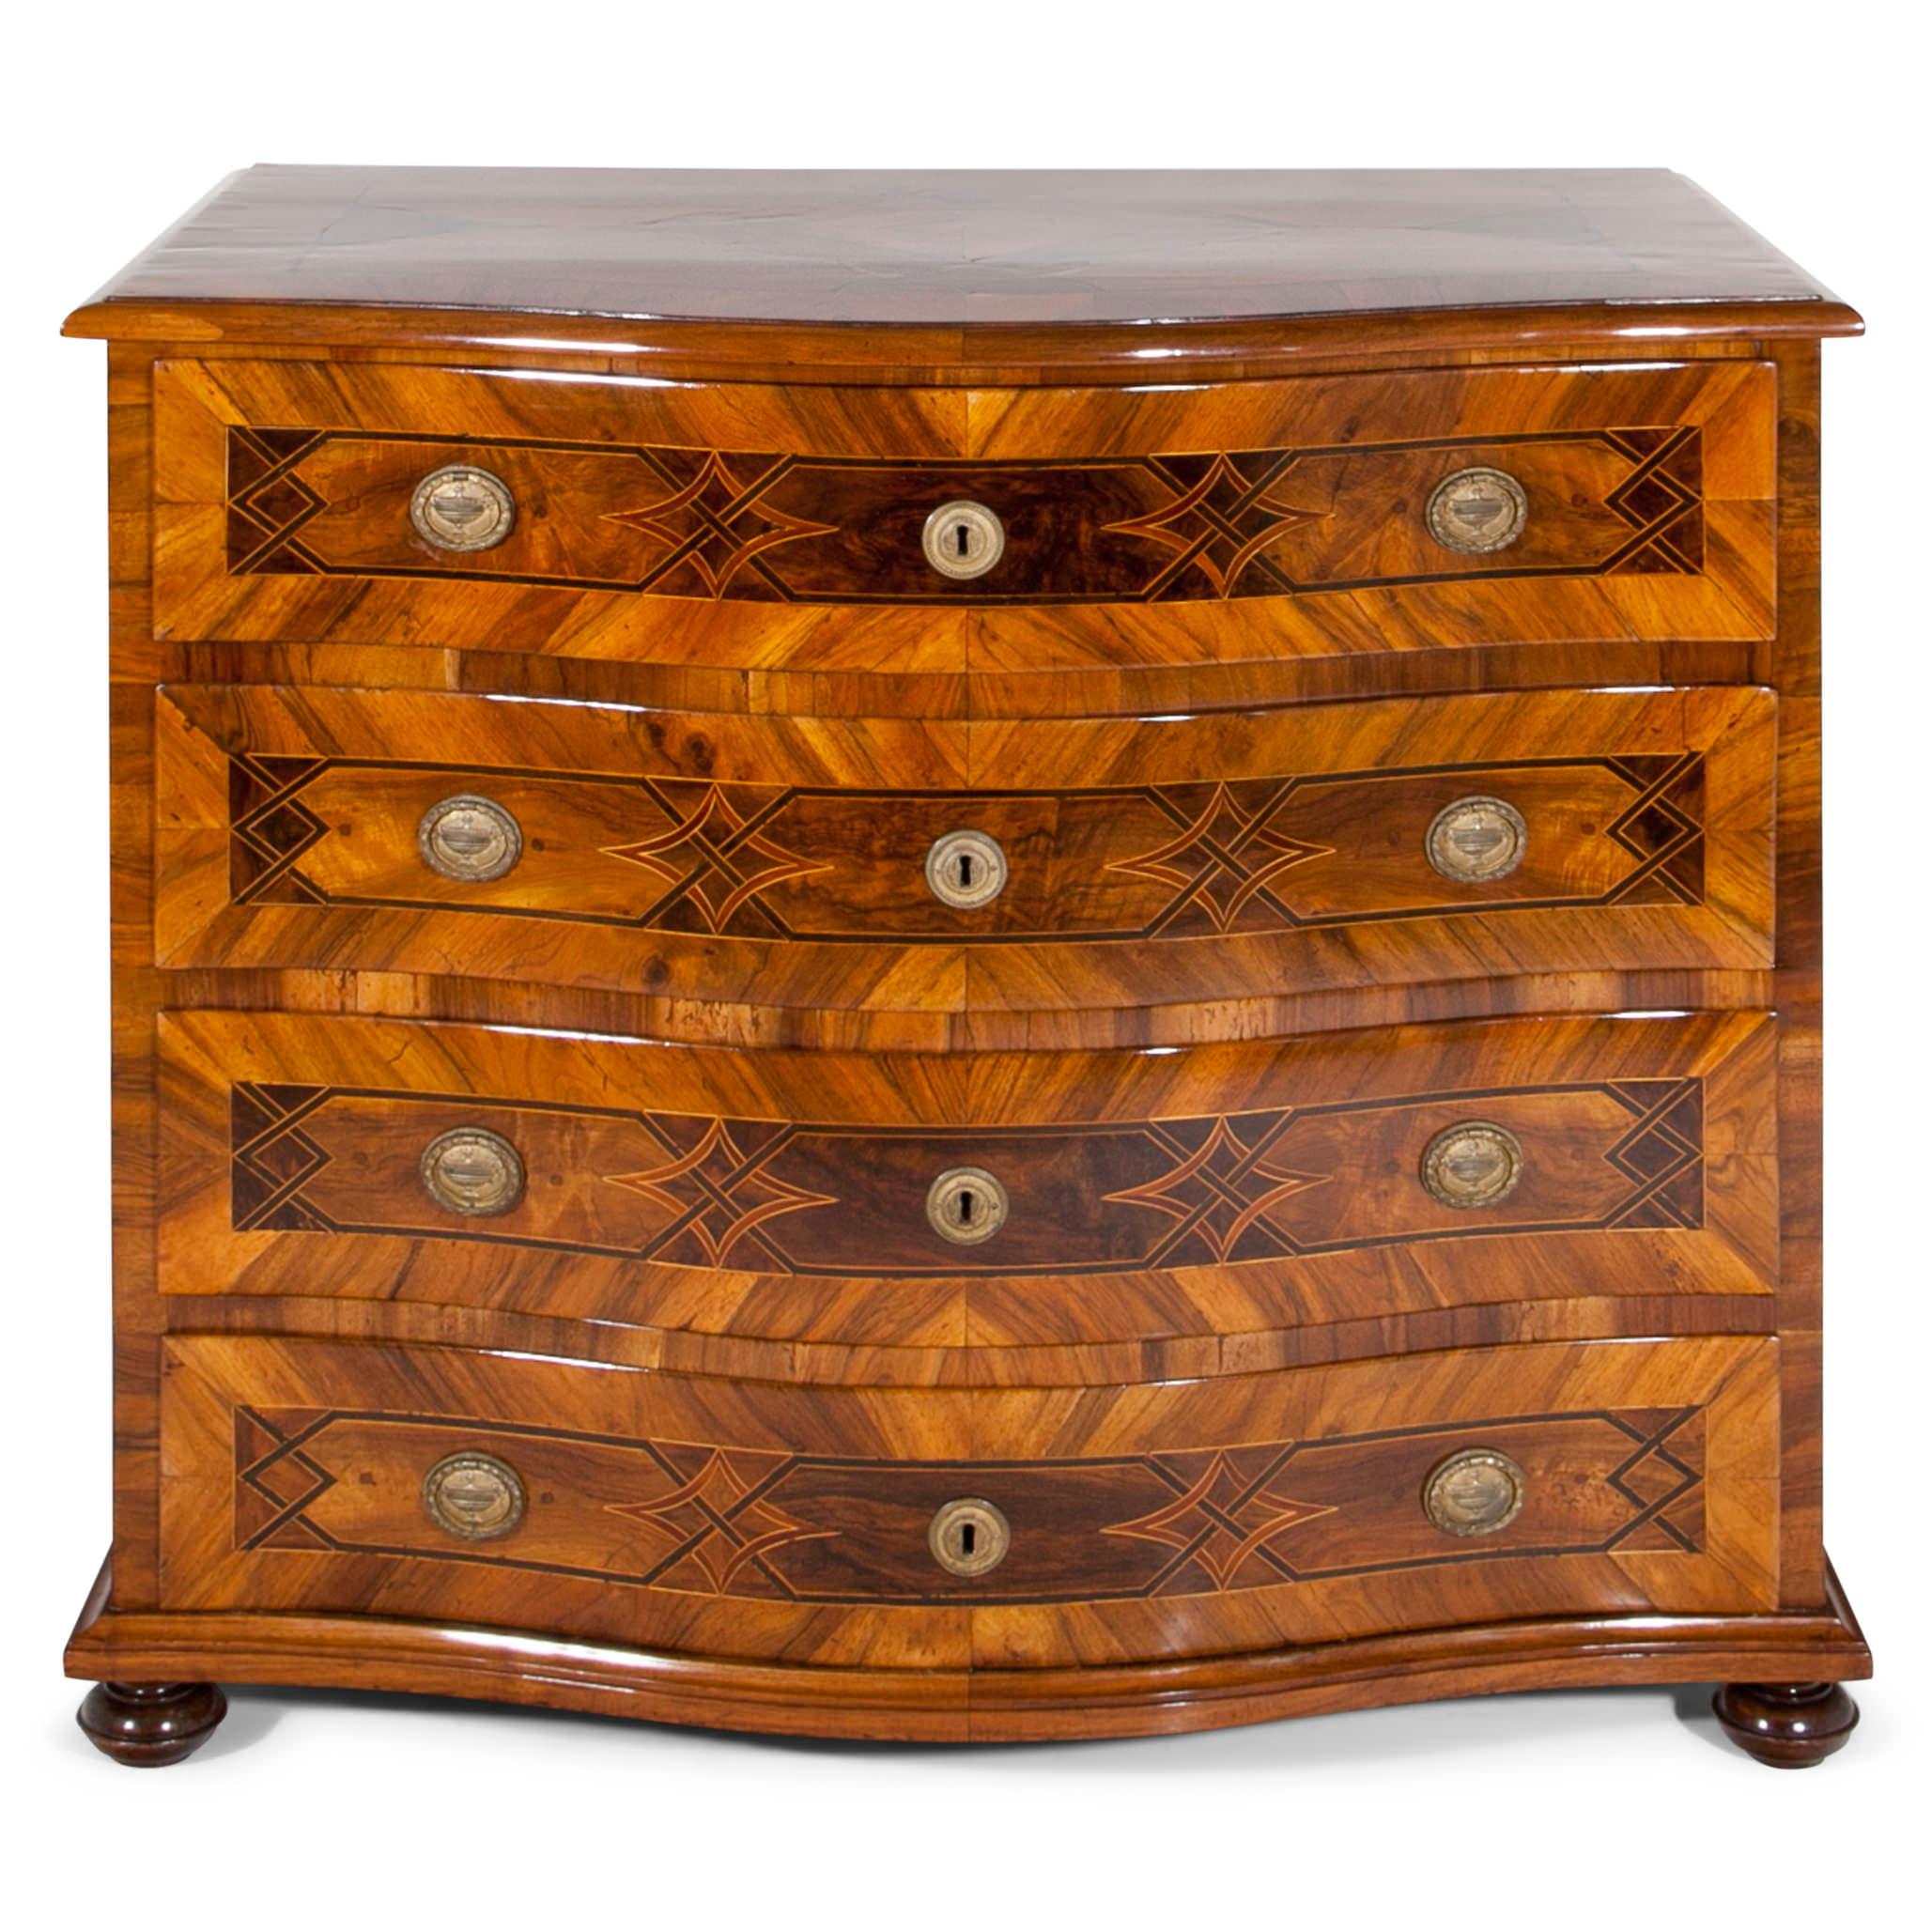 Four drawered Baroque chest of drawers, standing on bun feet. The body shows a bellied front and beautiful strap work marquetry on the drawers.